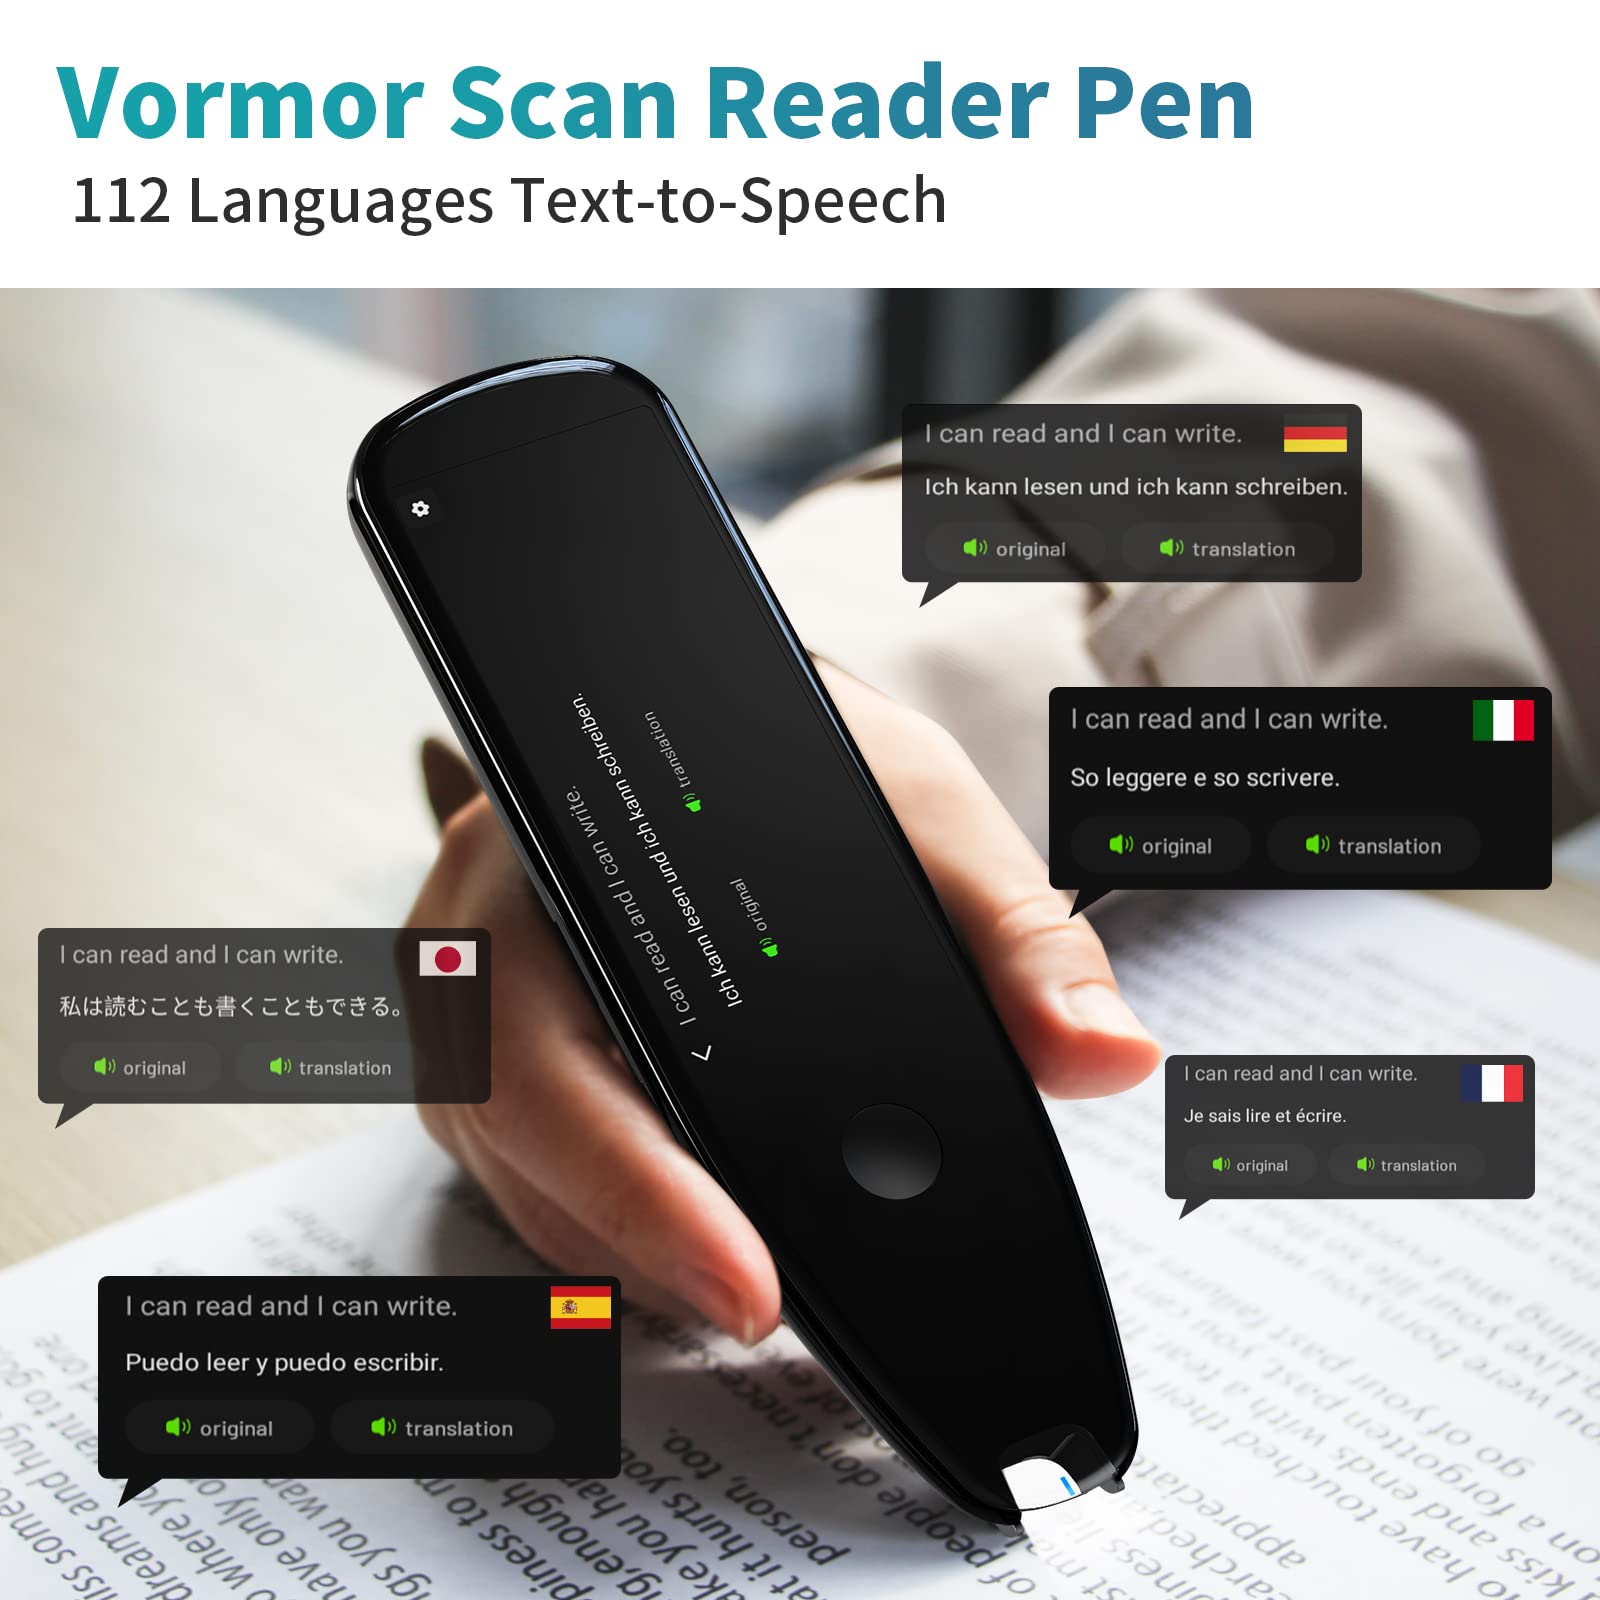 Adelagnes X5 Pro Language Translator Device Real Time,Reader Scanner Pen Dictionary Voice Translator Support 112 Languages Text to Speech OCR/WiFi Translator Suitable for Meetings Travel Learning